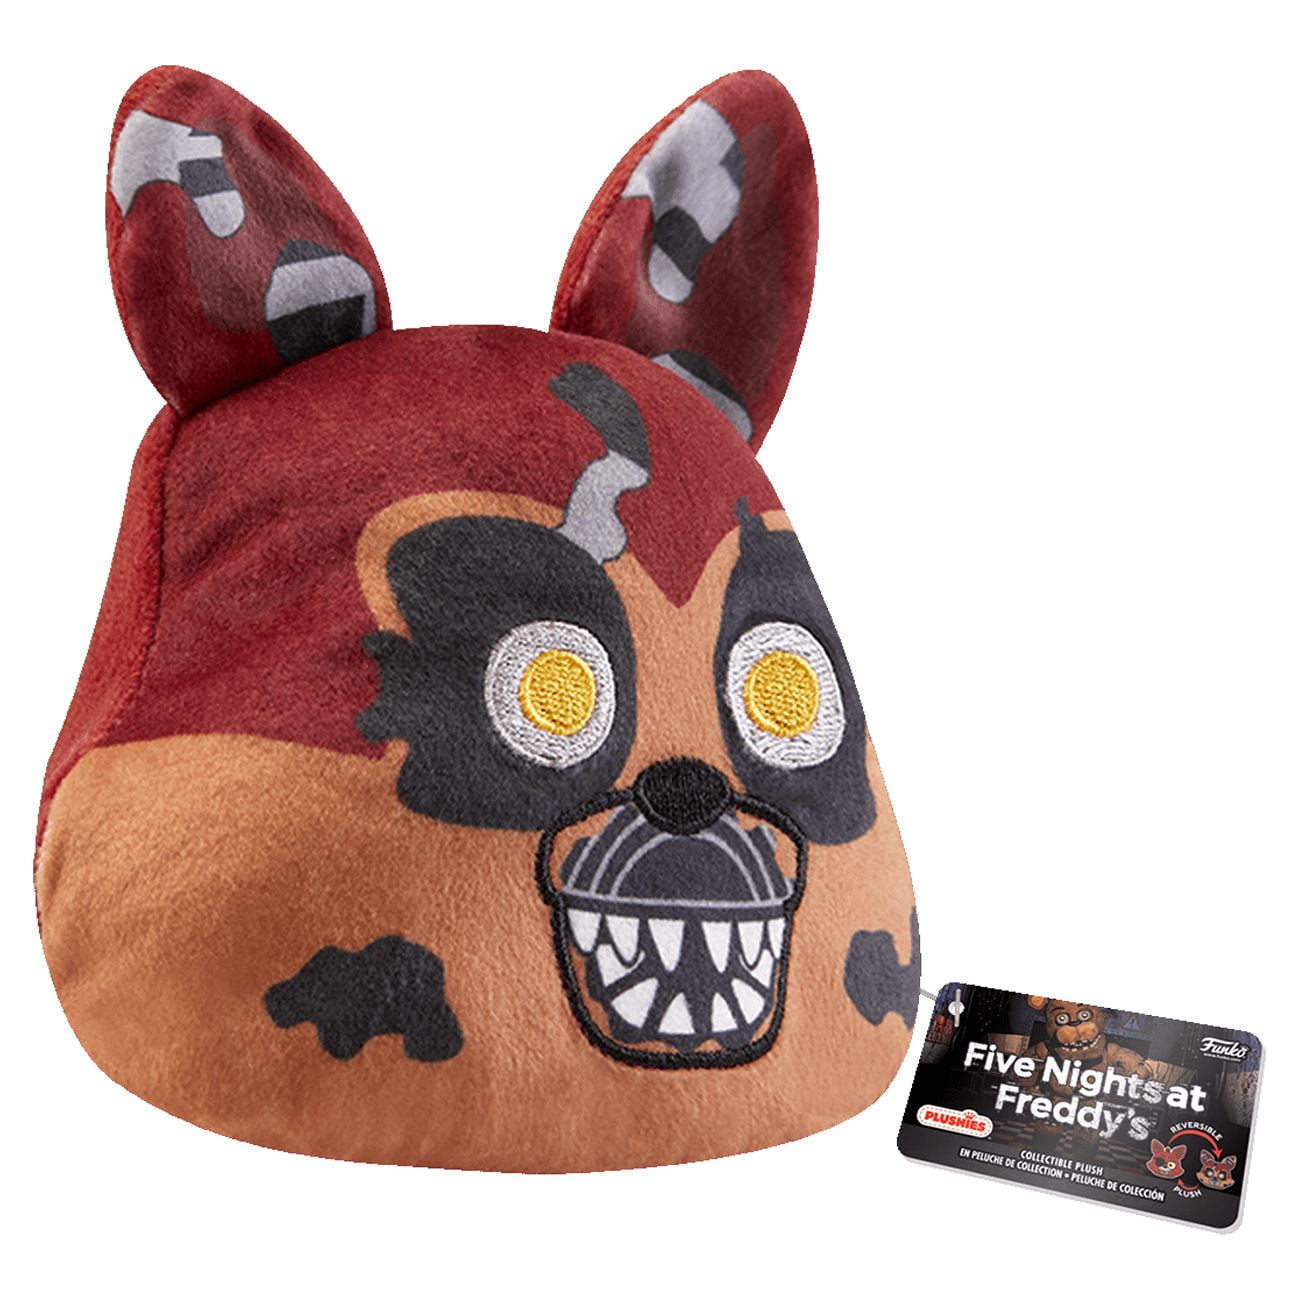  Funko Plush: Five Nights at Freddy's Reversible Heads - Freddy 4  : Toys & Games